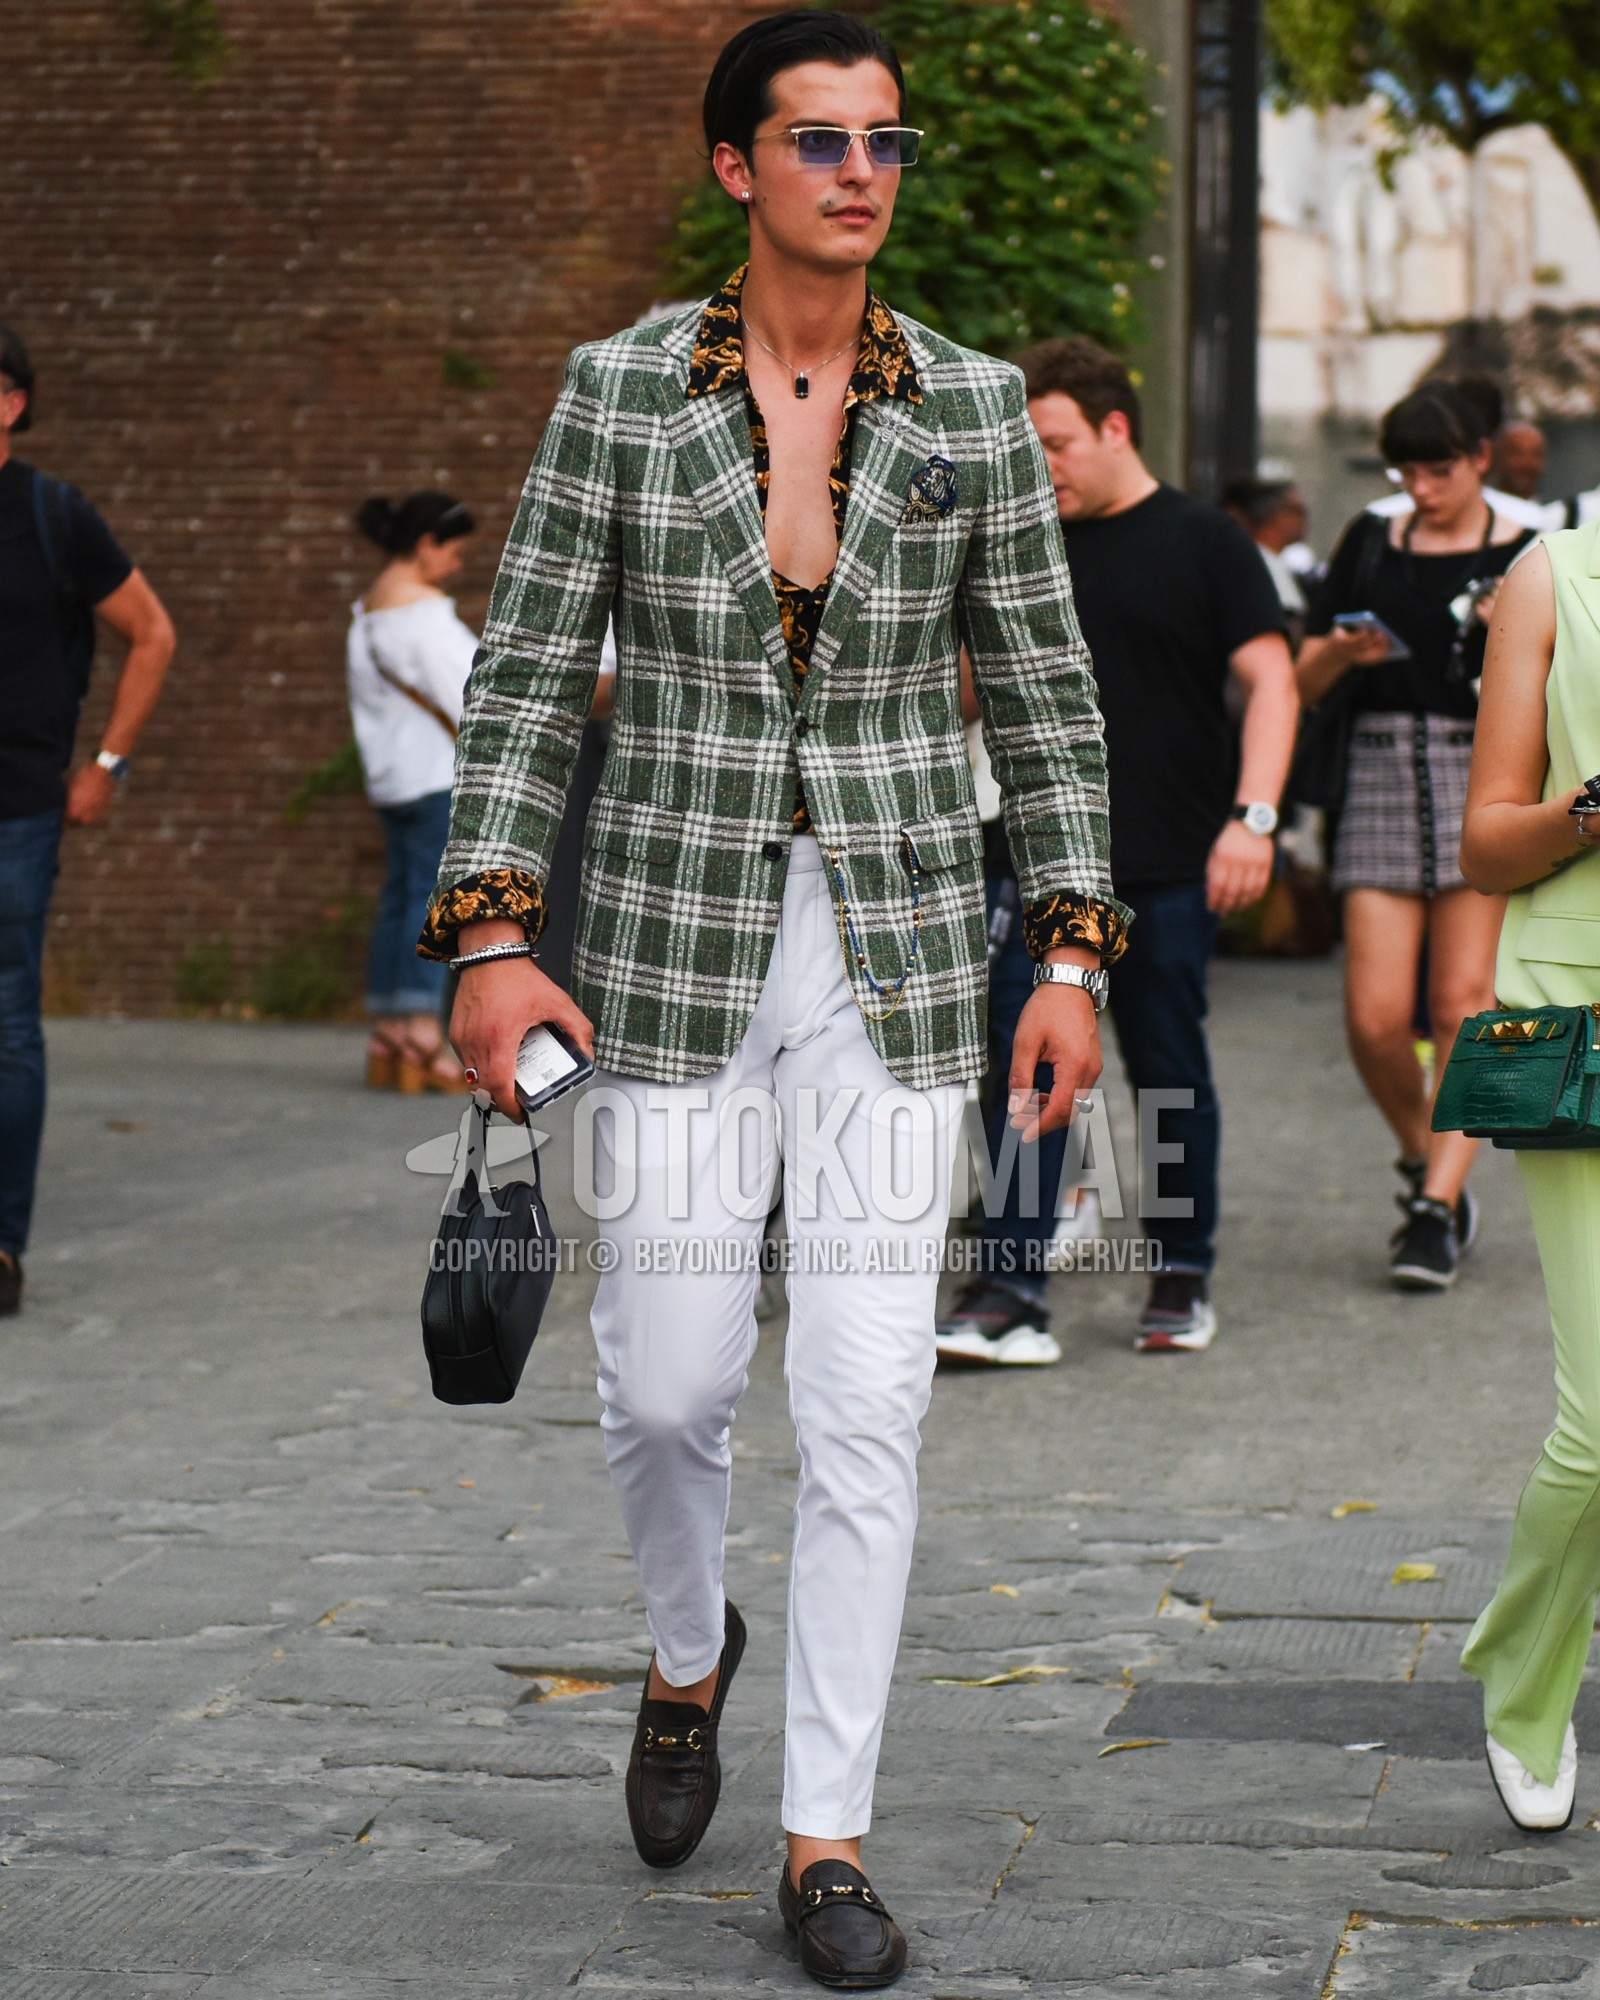 Men's spring summer outfit with gold plain sunglasses, green check tailored jacket, black graphic shirt, white plain cotton pants, brown bit loafers leather shoes.